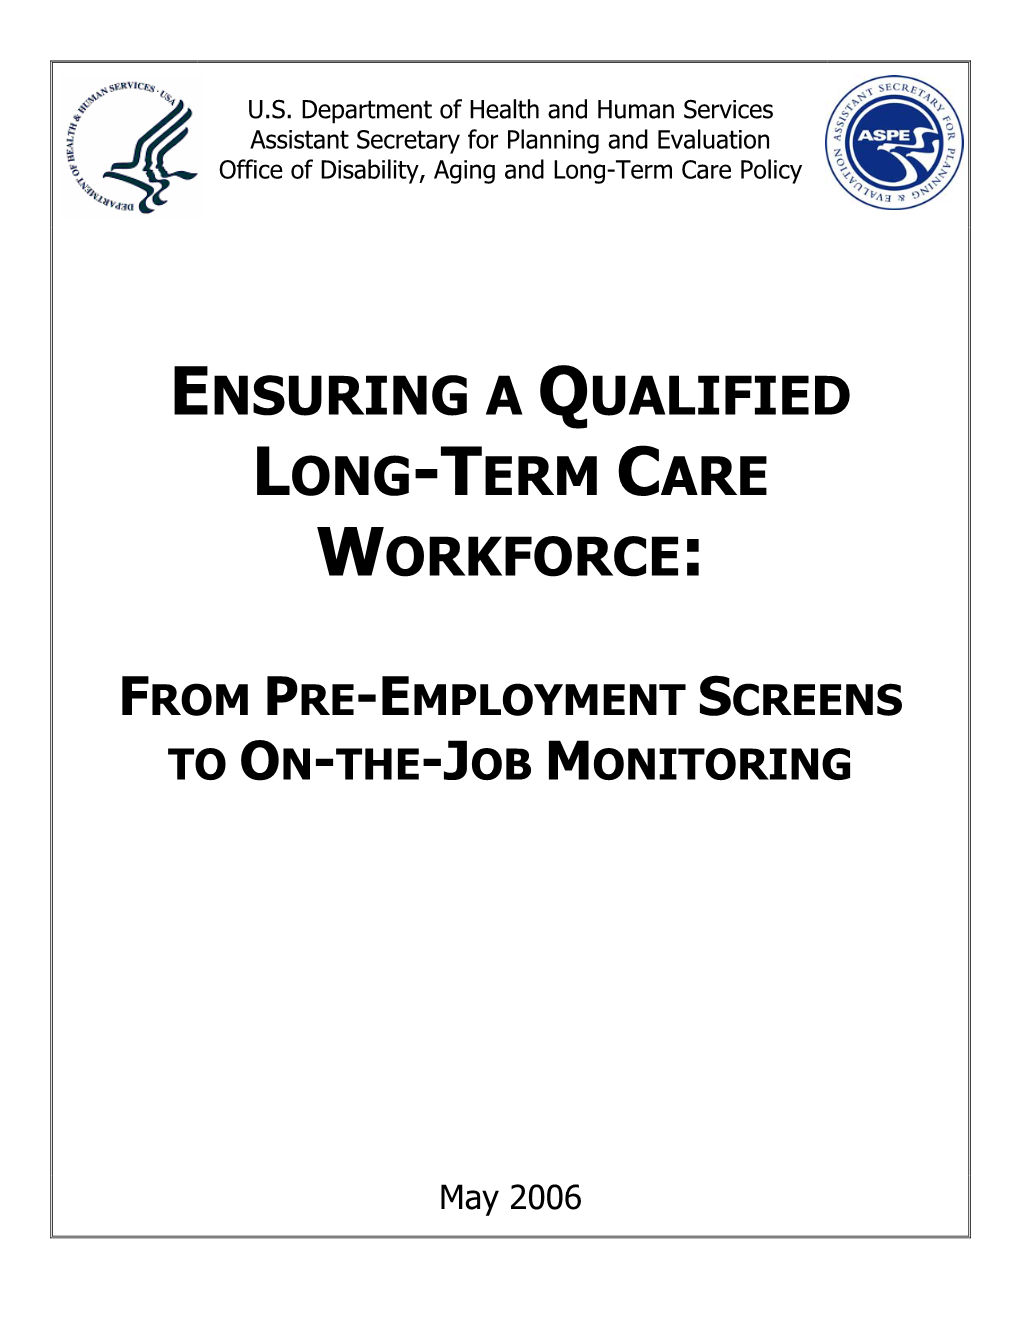 Ensuring a Qualified Long-Term Care Workforce